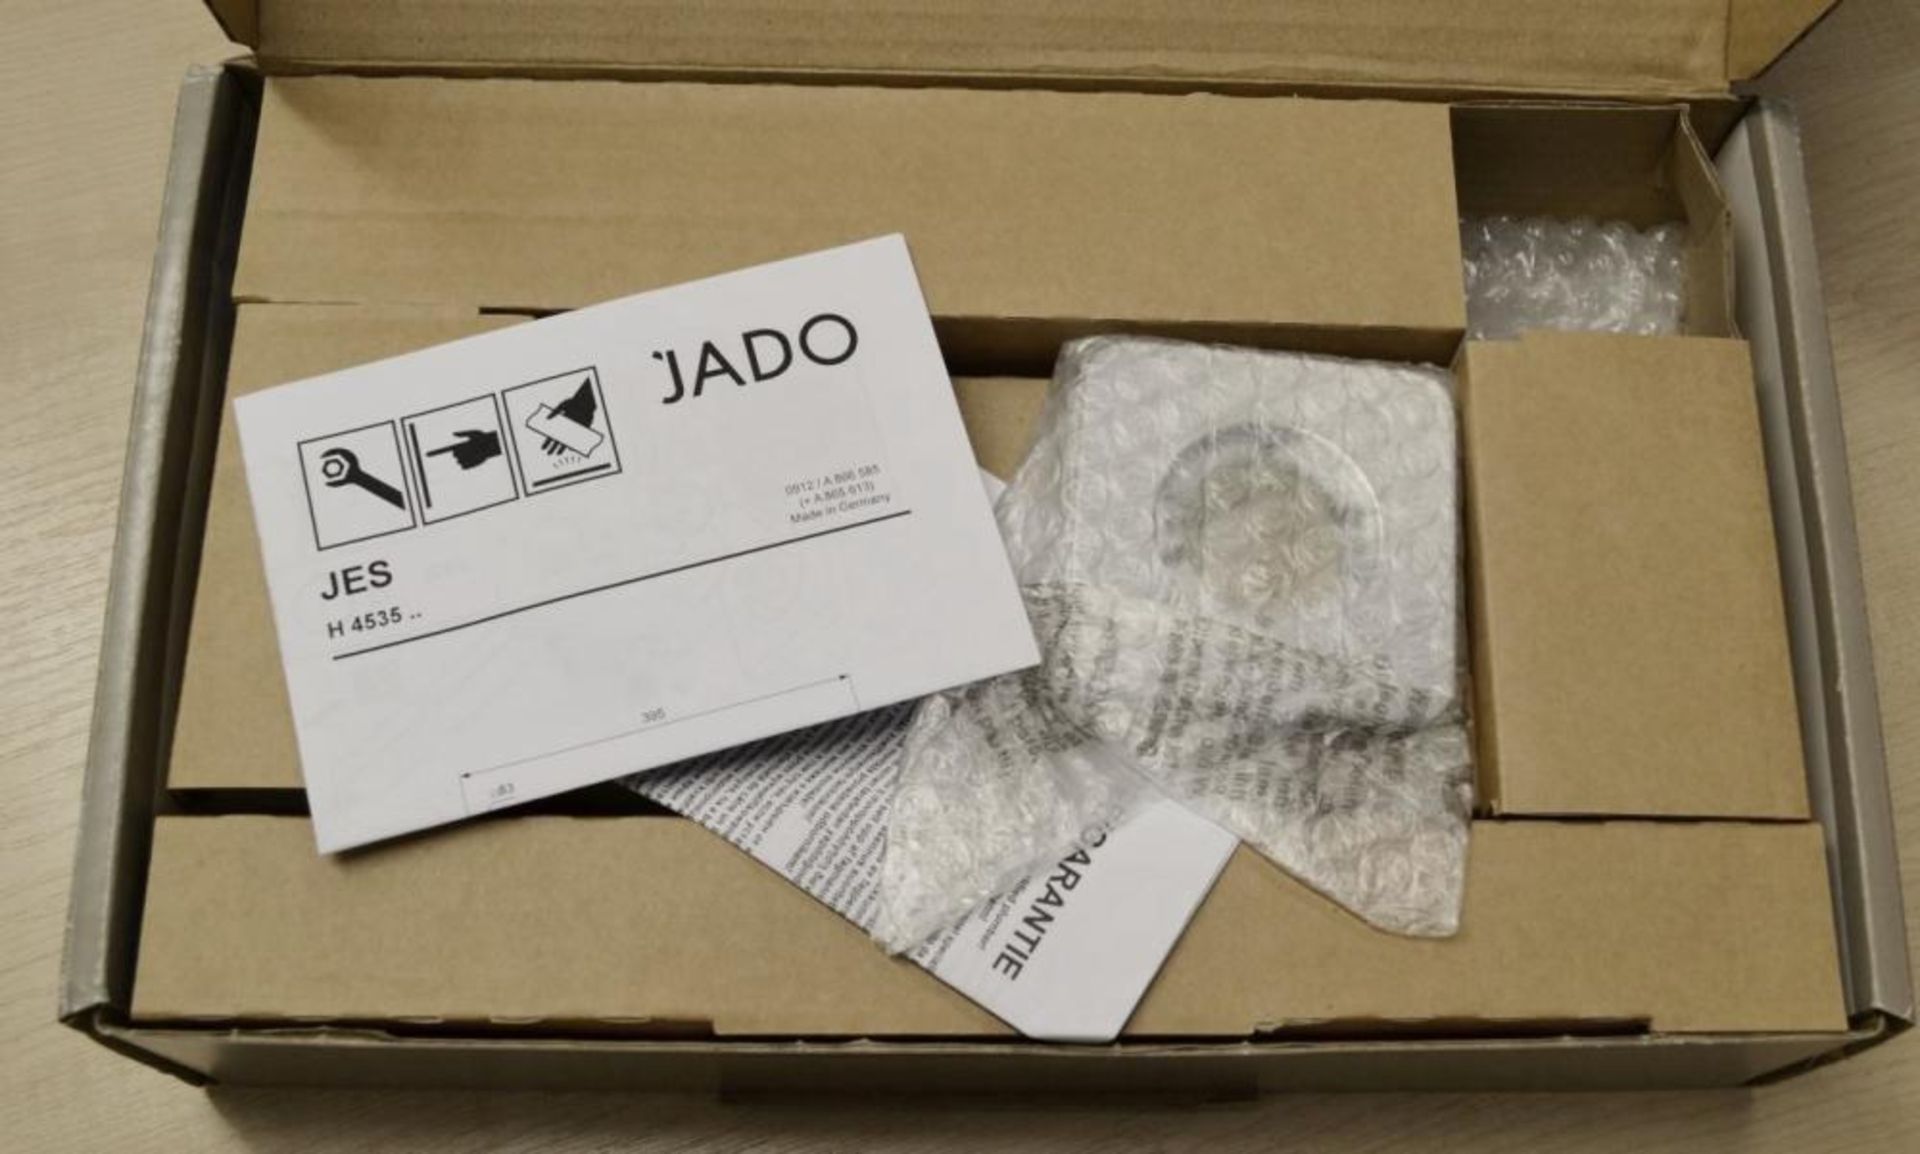 1 x Ideal Standard JADO &quot;Jes&quot; Chrome Plated Wall Connection For Overhead Shower (H4535AA) - Image 5 of 6